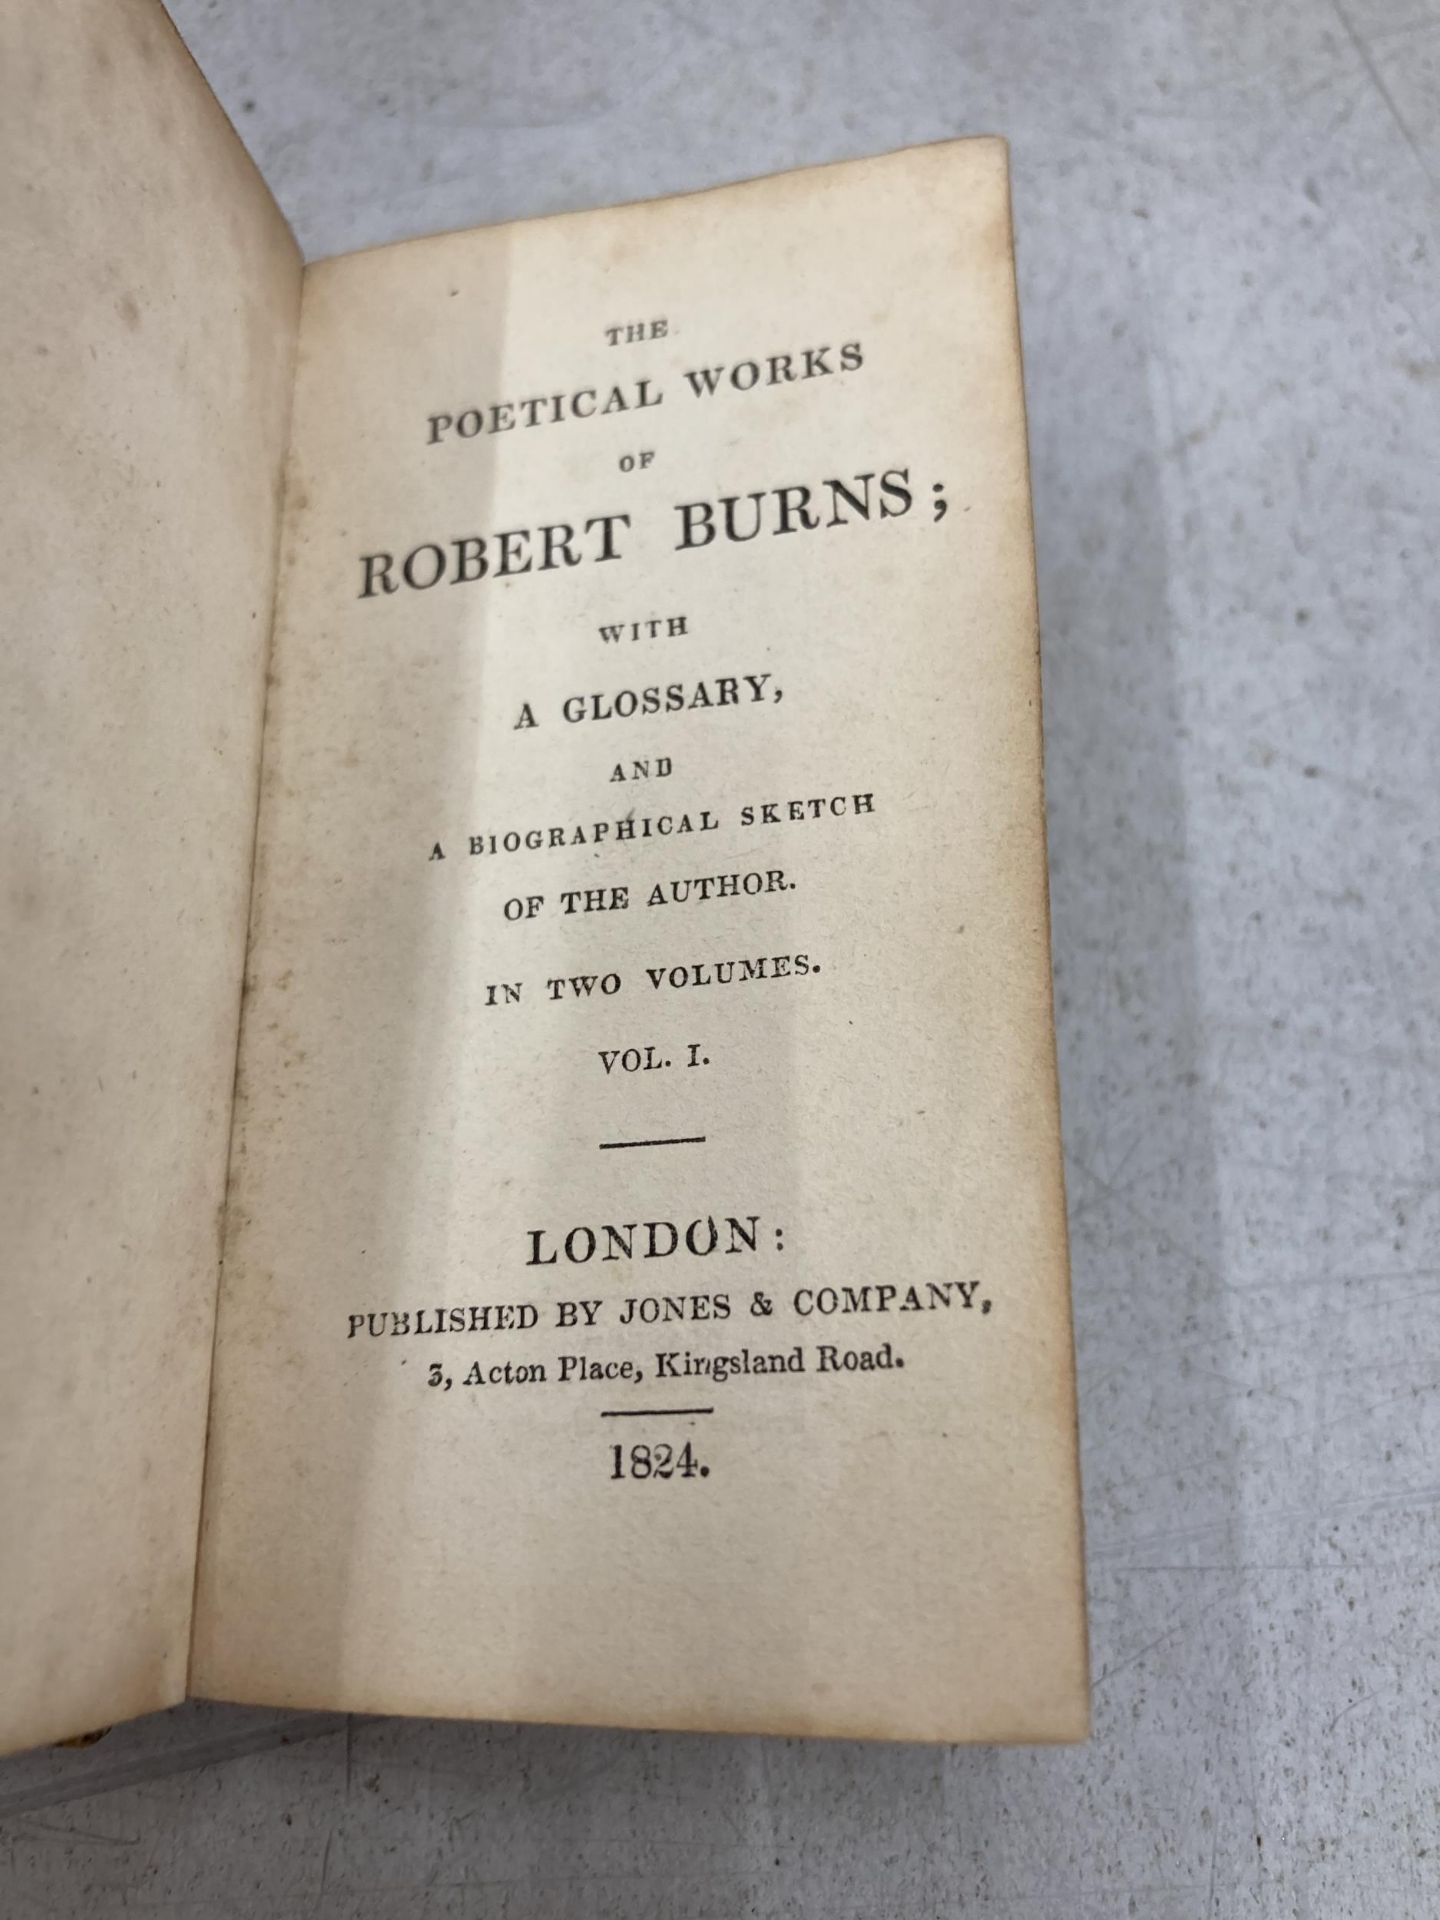 AN 1825 LEATHER BOUND MINIATURE BOOK - 'THE POETICAL WORKS OF ROBERT BURNS' - Image 3 of 6